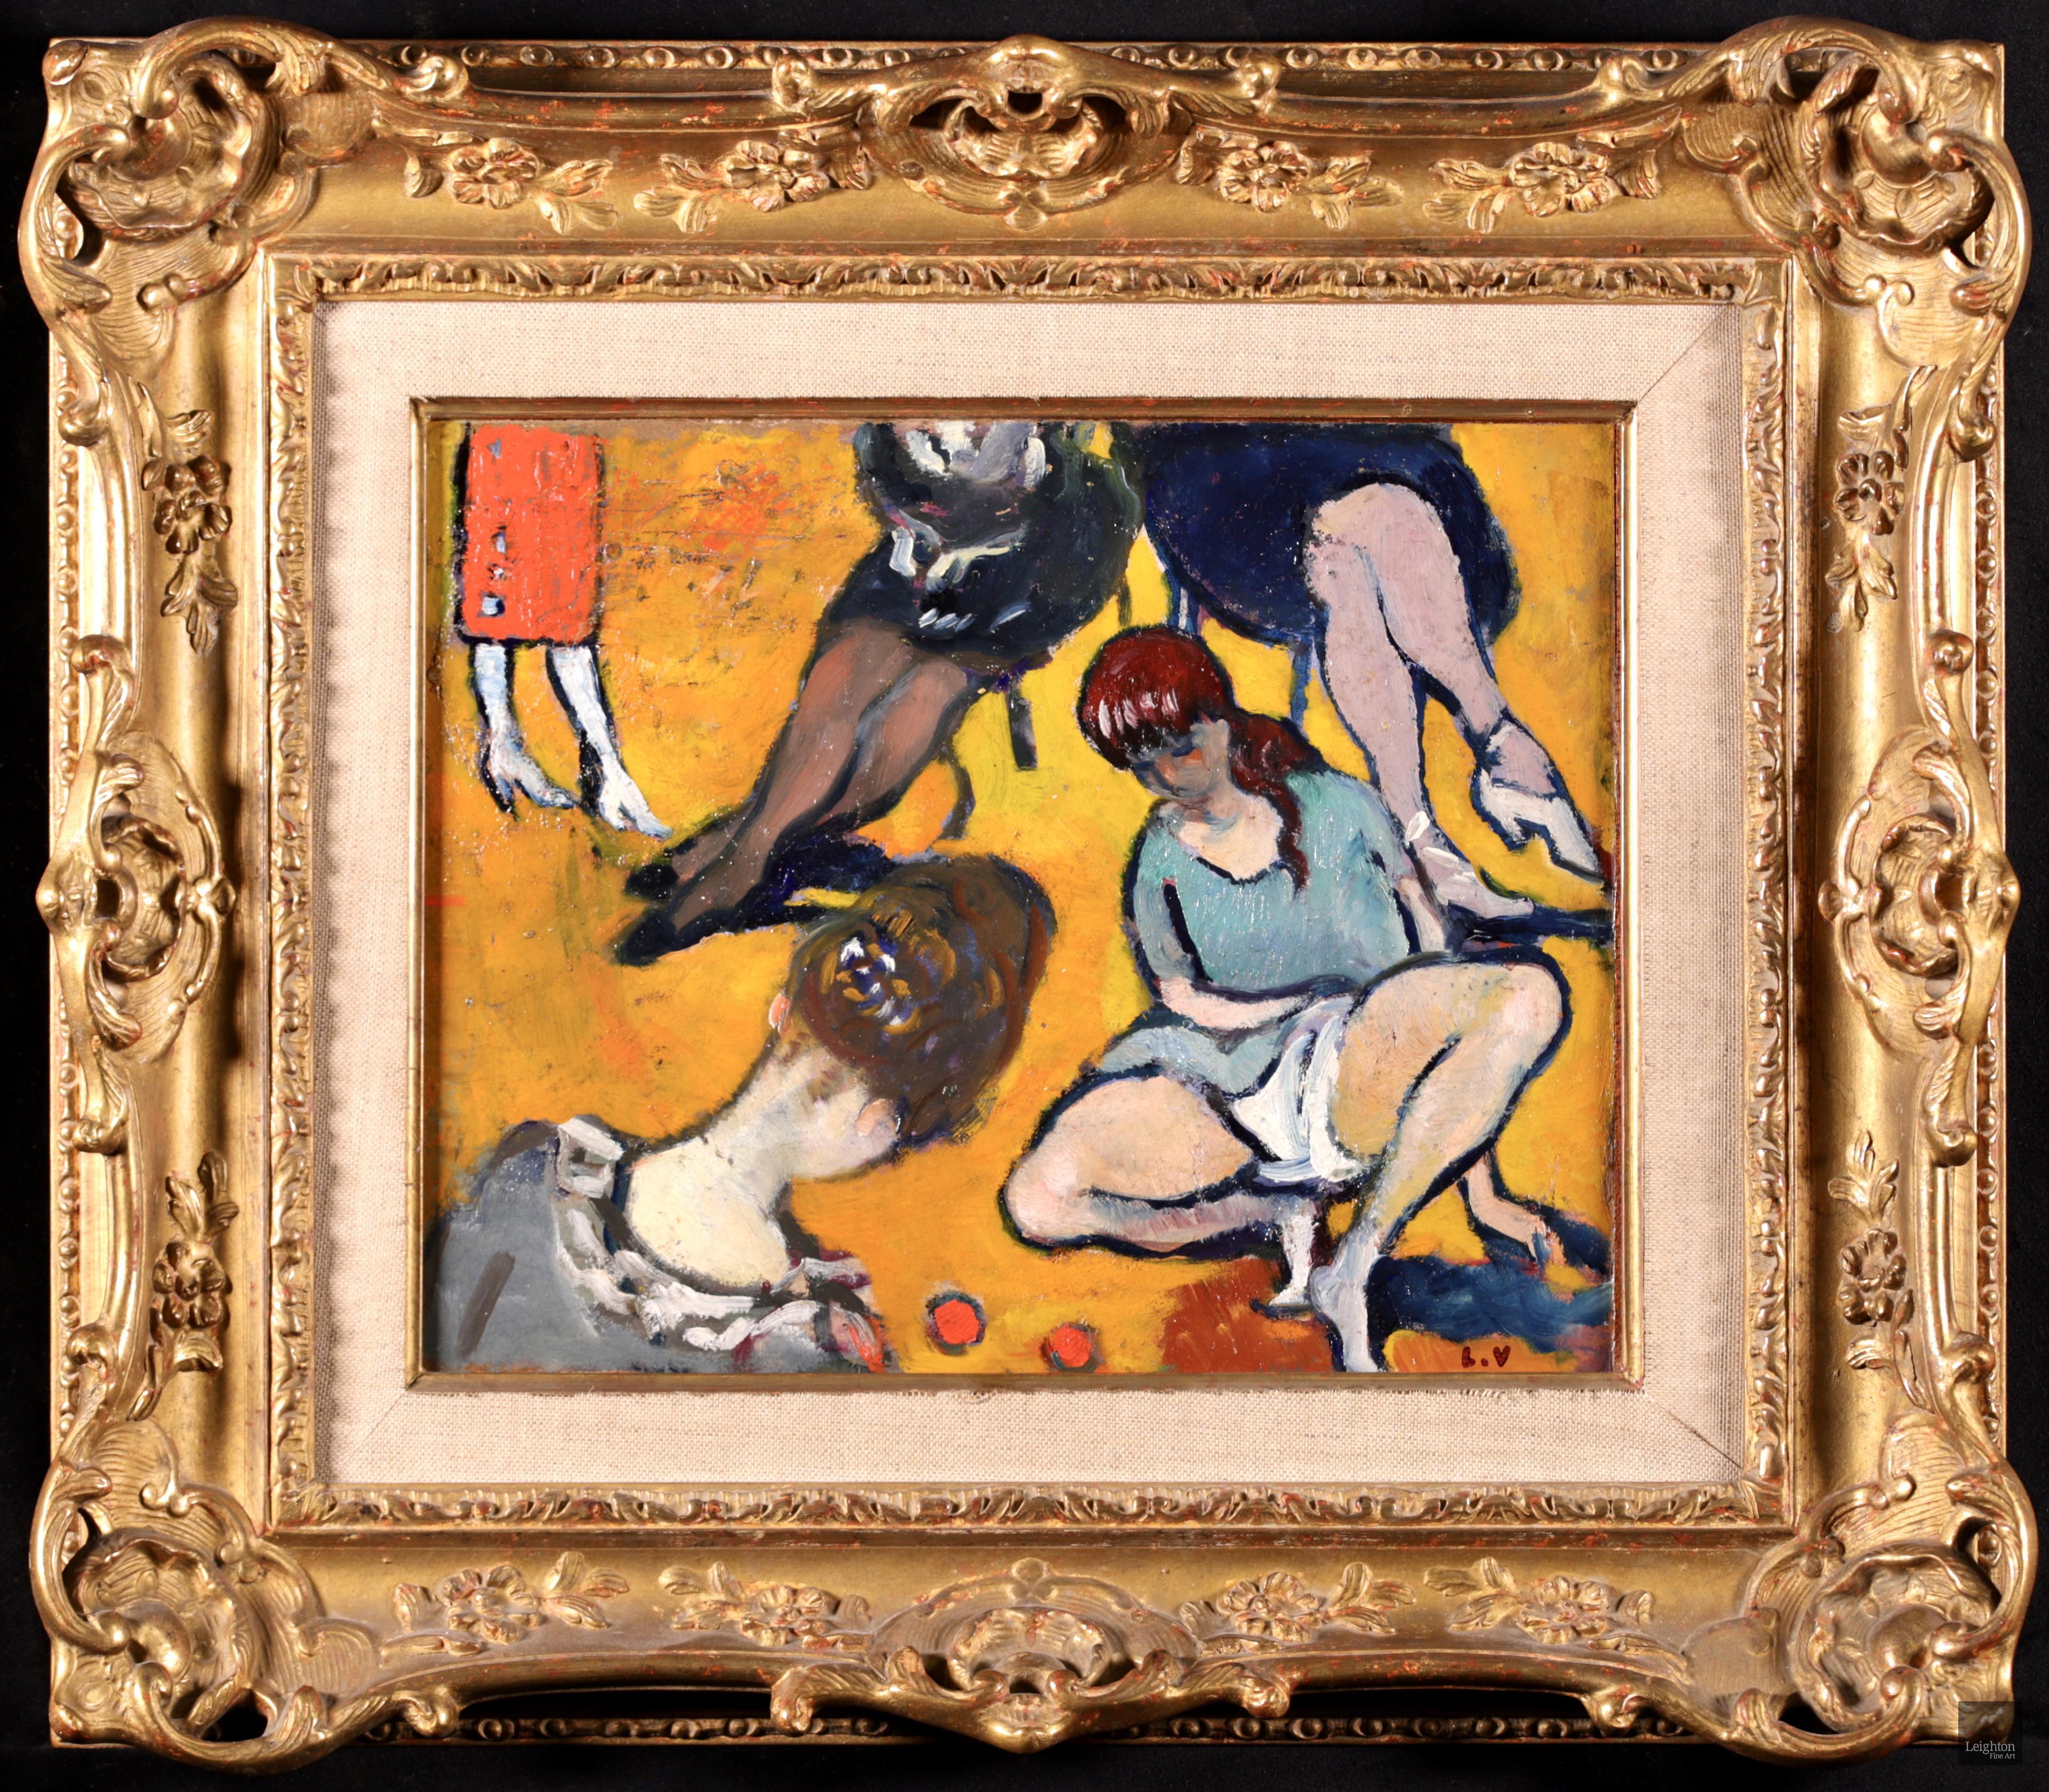 Signed fauvist figurative oil on panel by French painter Louis Valtat. The work depicts two girls playing with red marbles. Behind them we see the legs of elegantly dressed ladies - two seated in a chair and one standing to the left. The figures